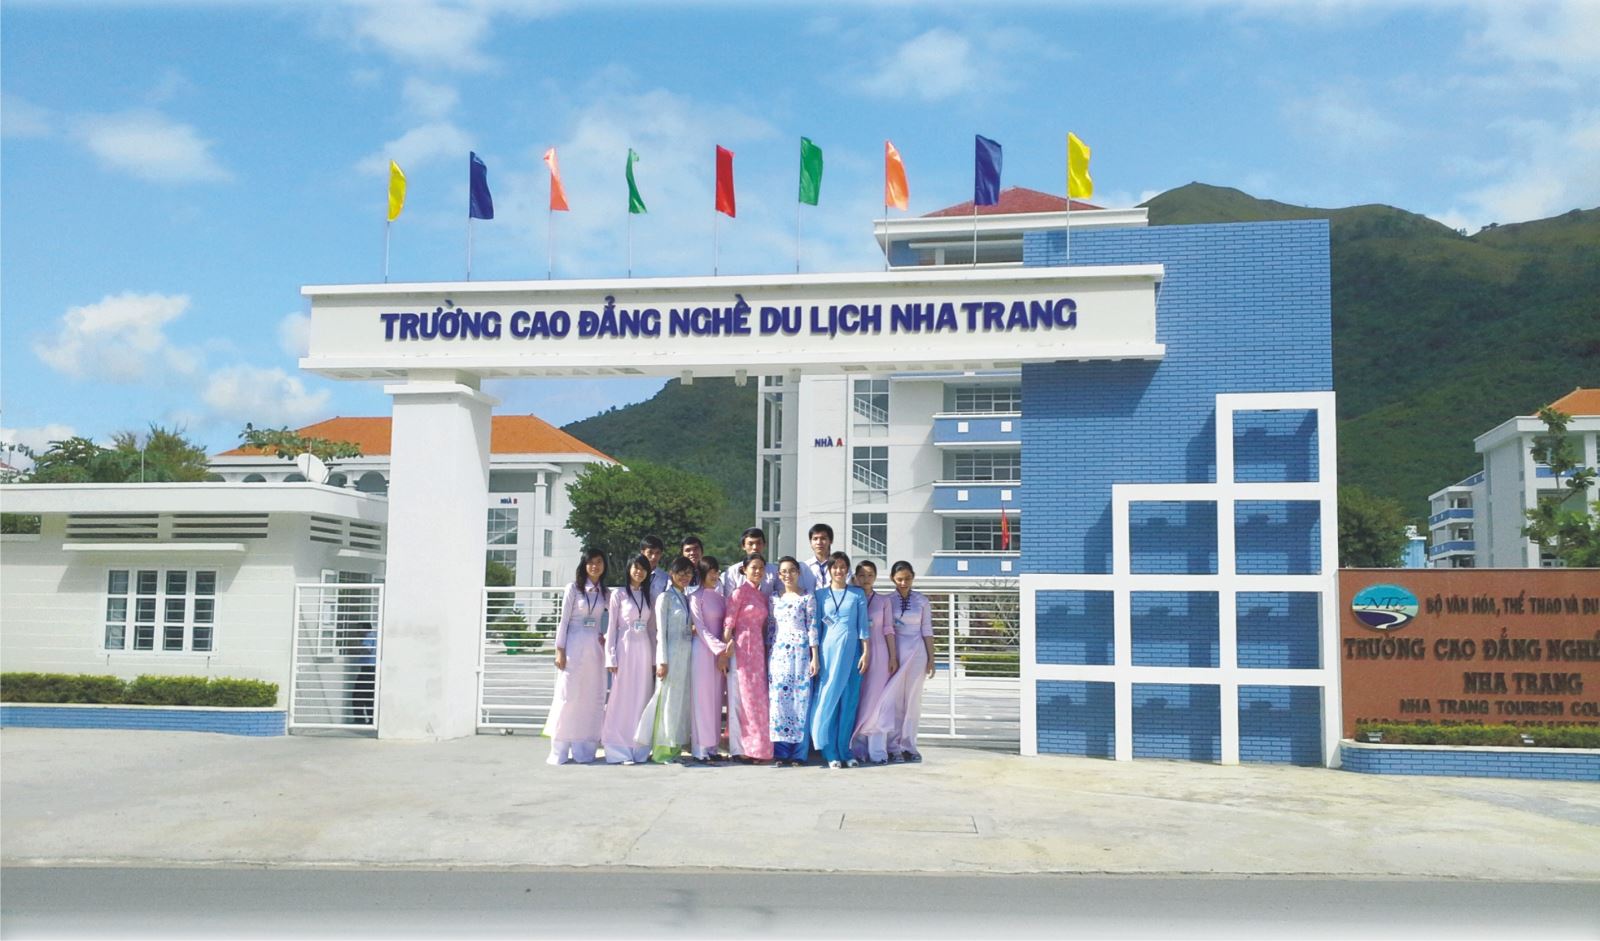 Vocational College of tourism in Nha Trang